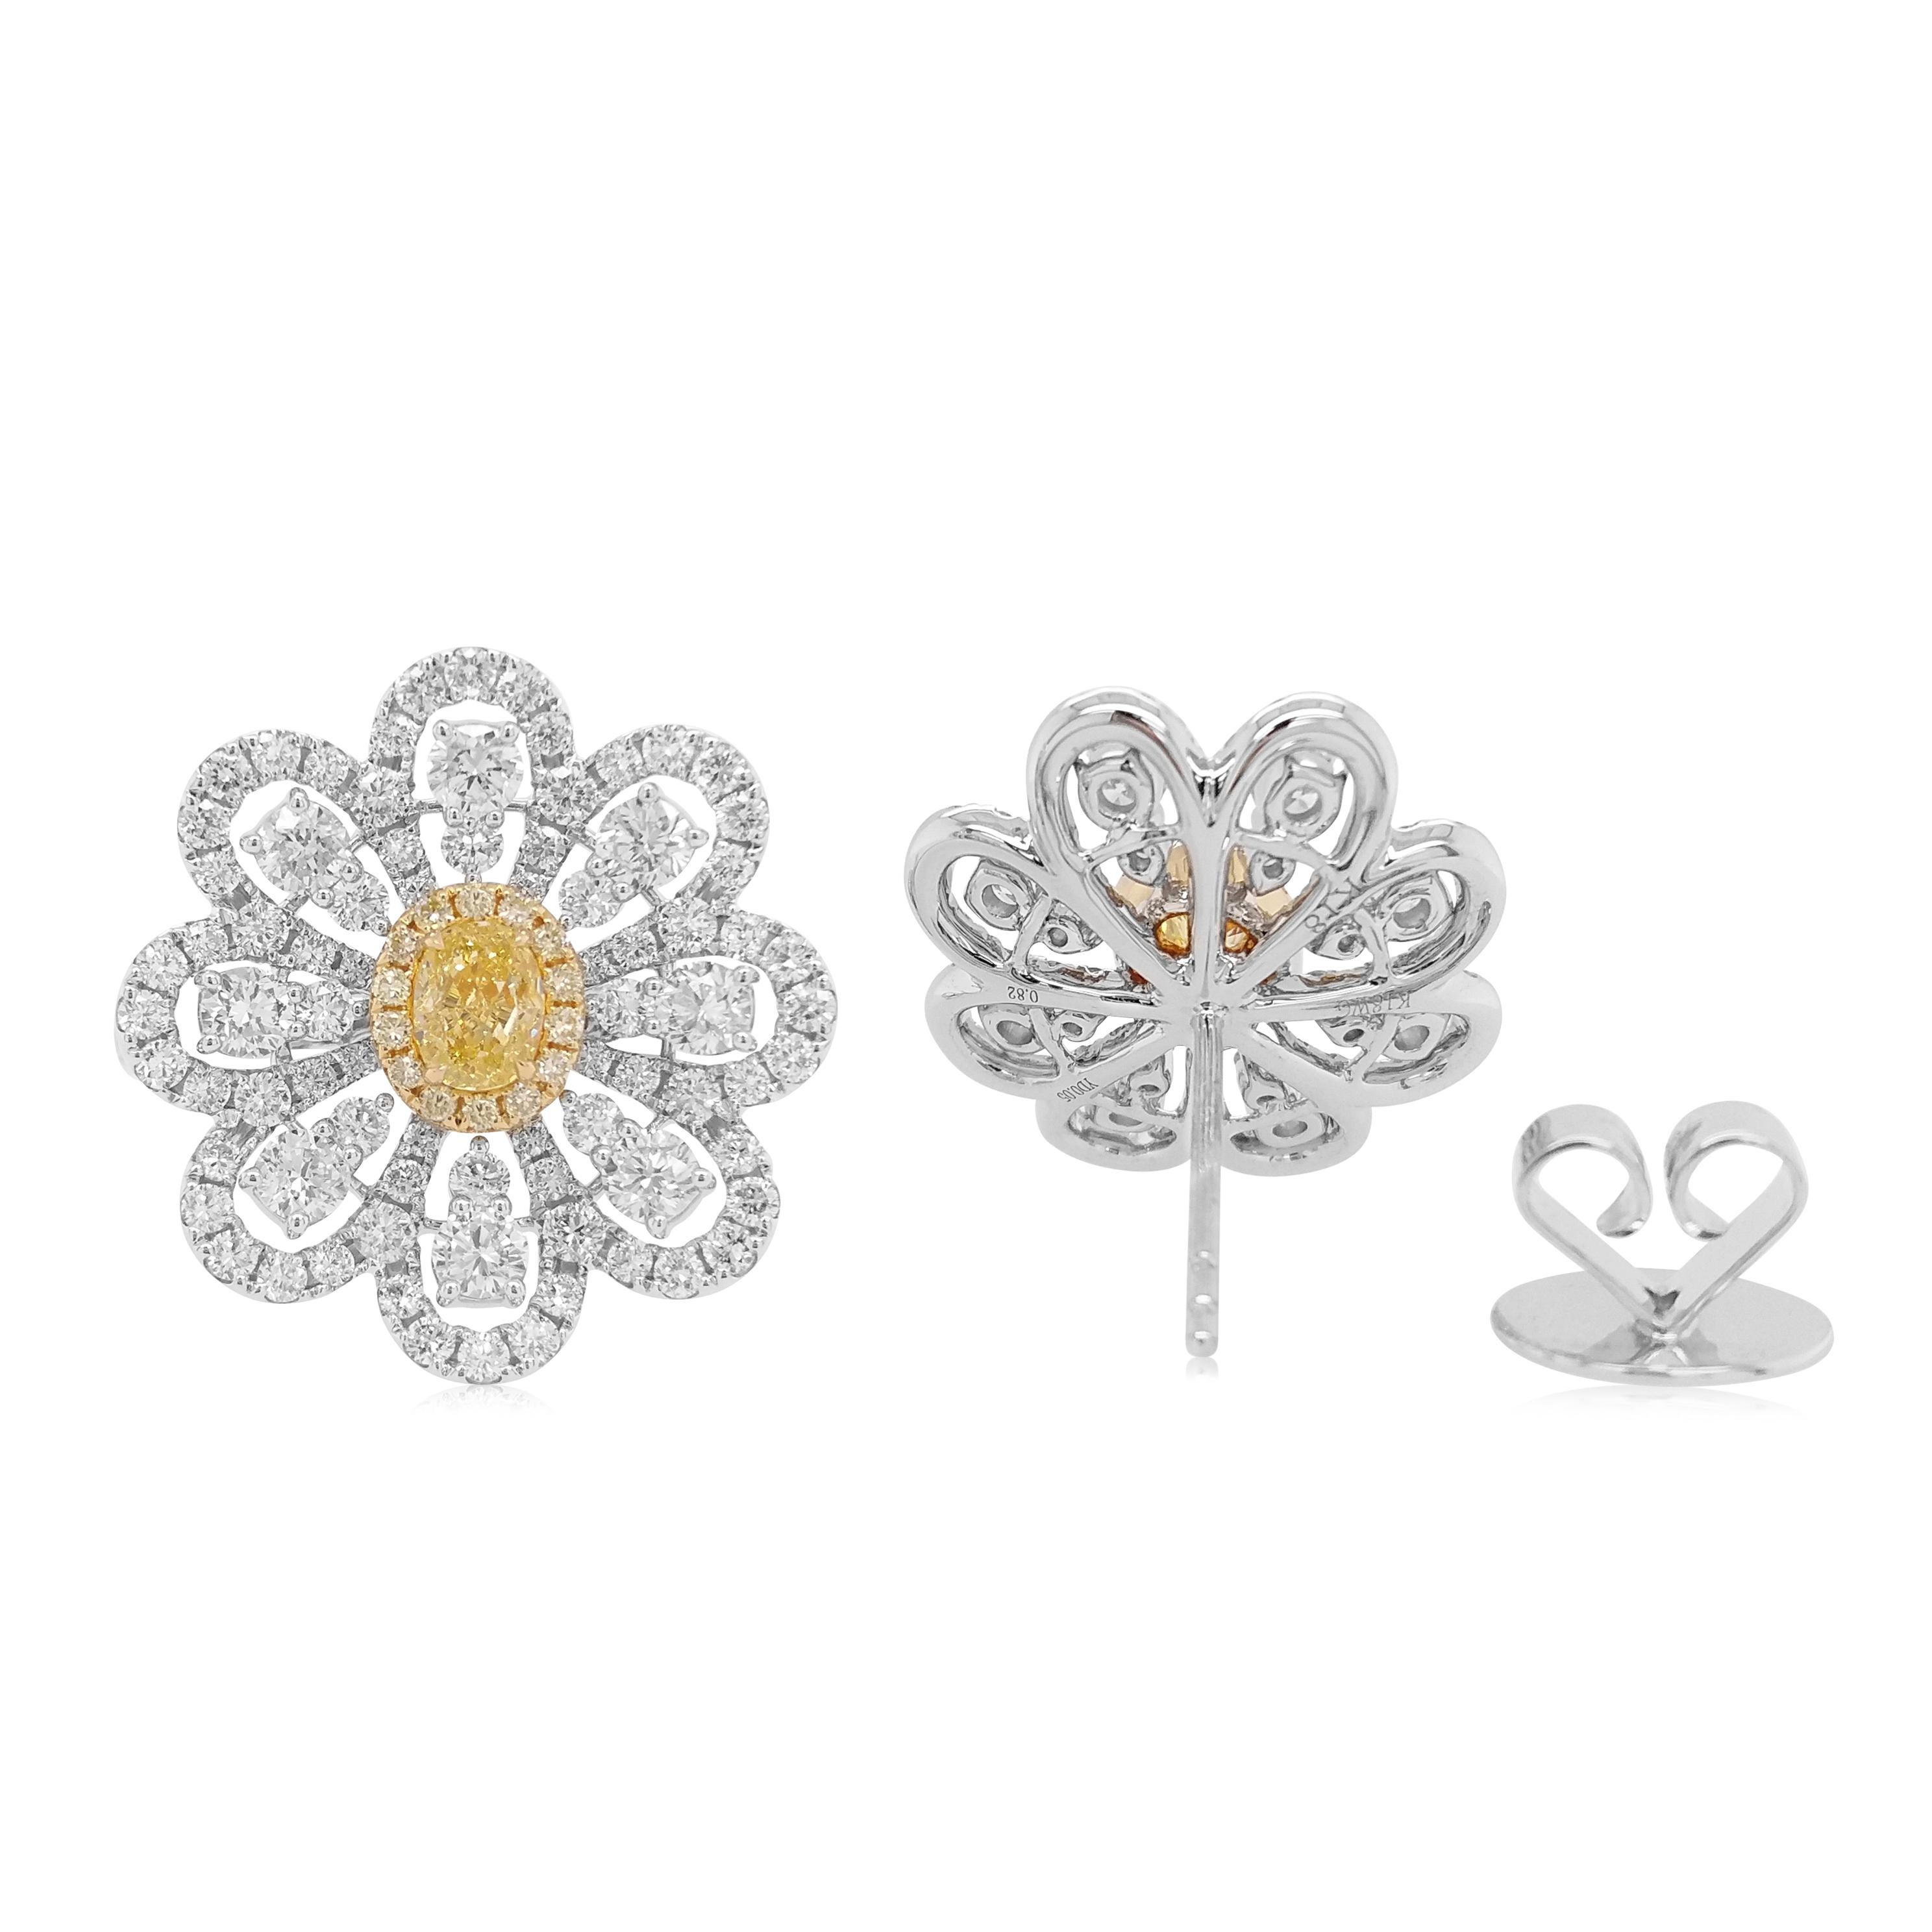 Natural Yellow Diamond Studded Earrings with Round Brilliant cut white diamonds creating a flower-like design are a beautiful addition to your jewelry collection.
-	Natural Fancy Yellow diamond (Oval), 0.393 carats (CGL, Japan Certified)
-	Round